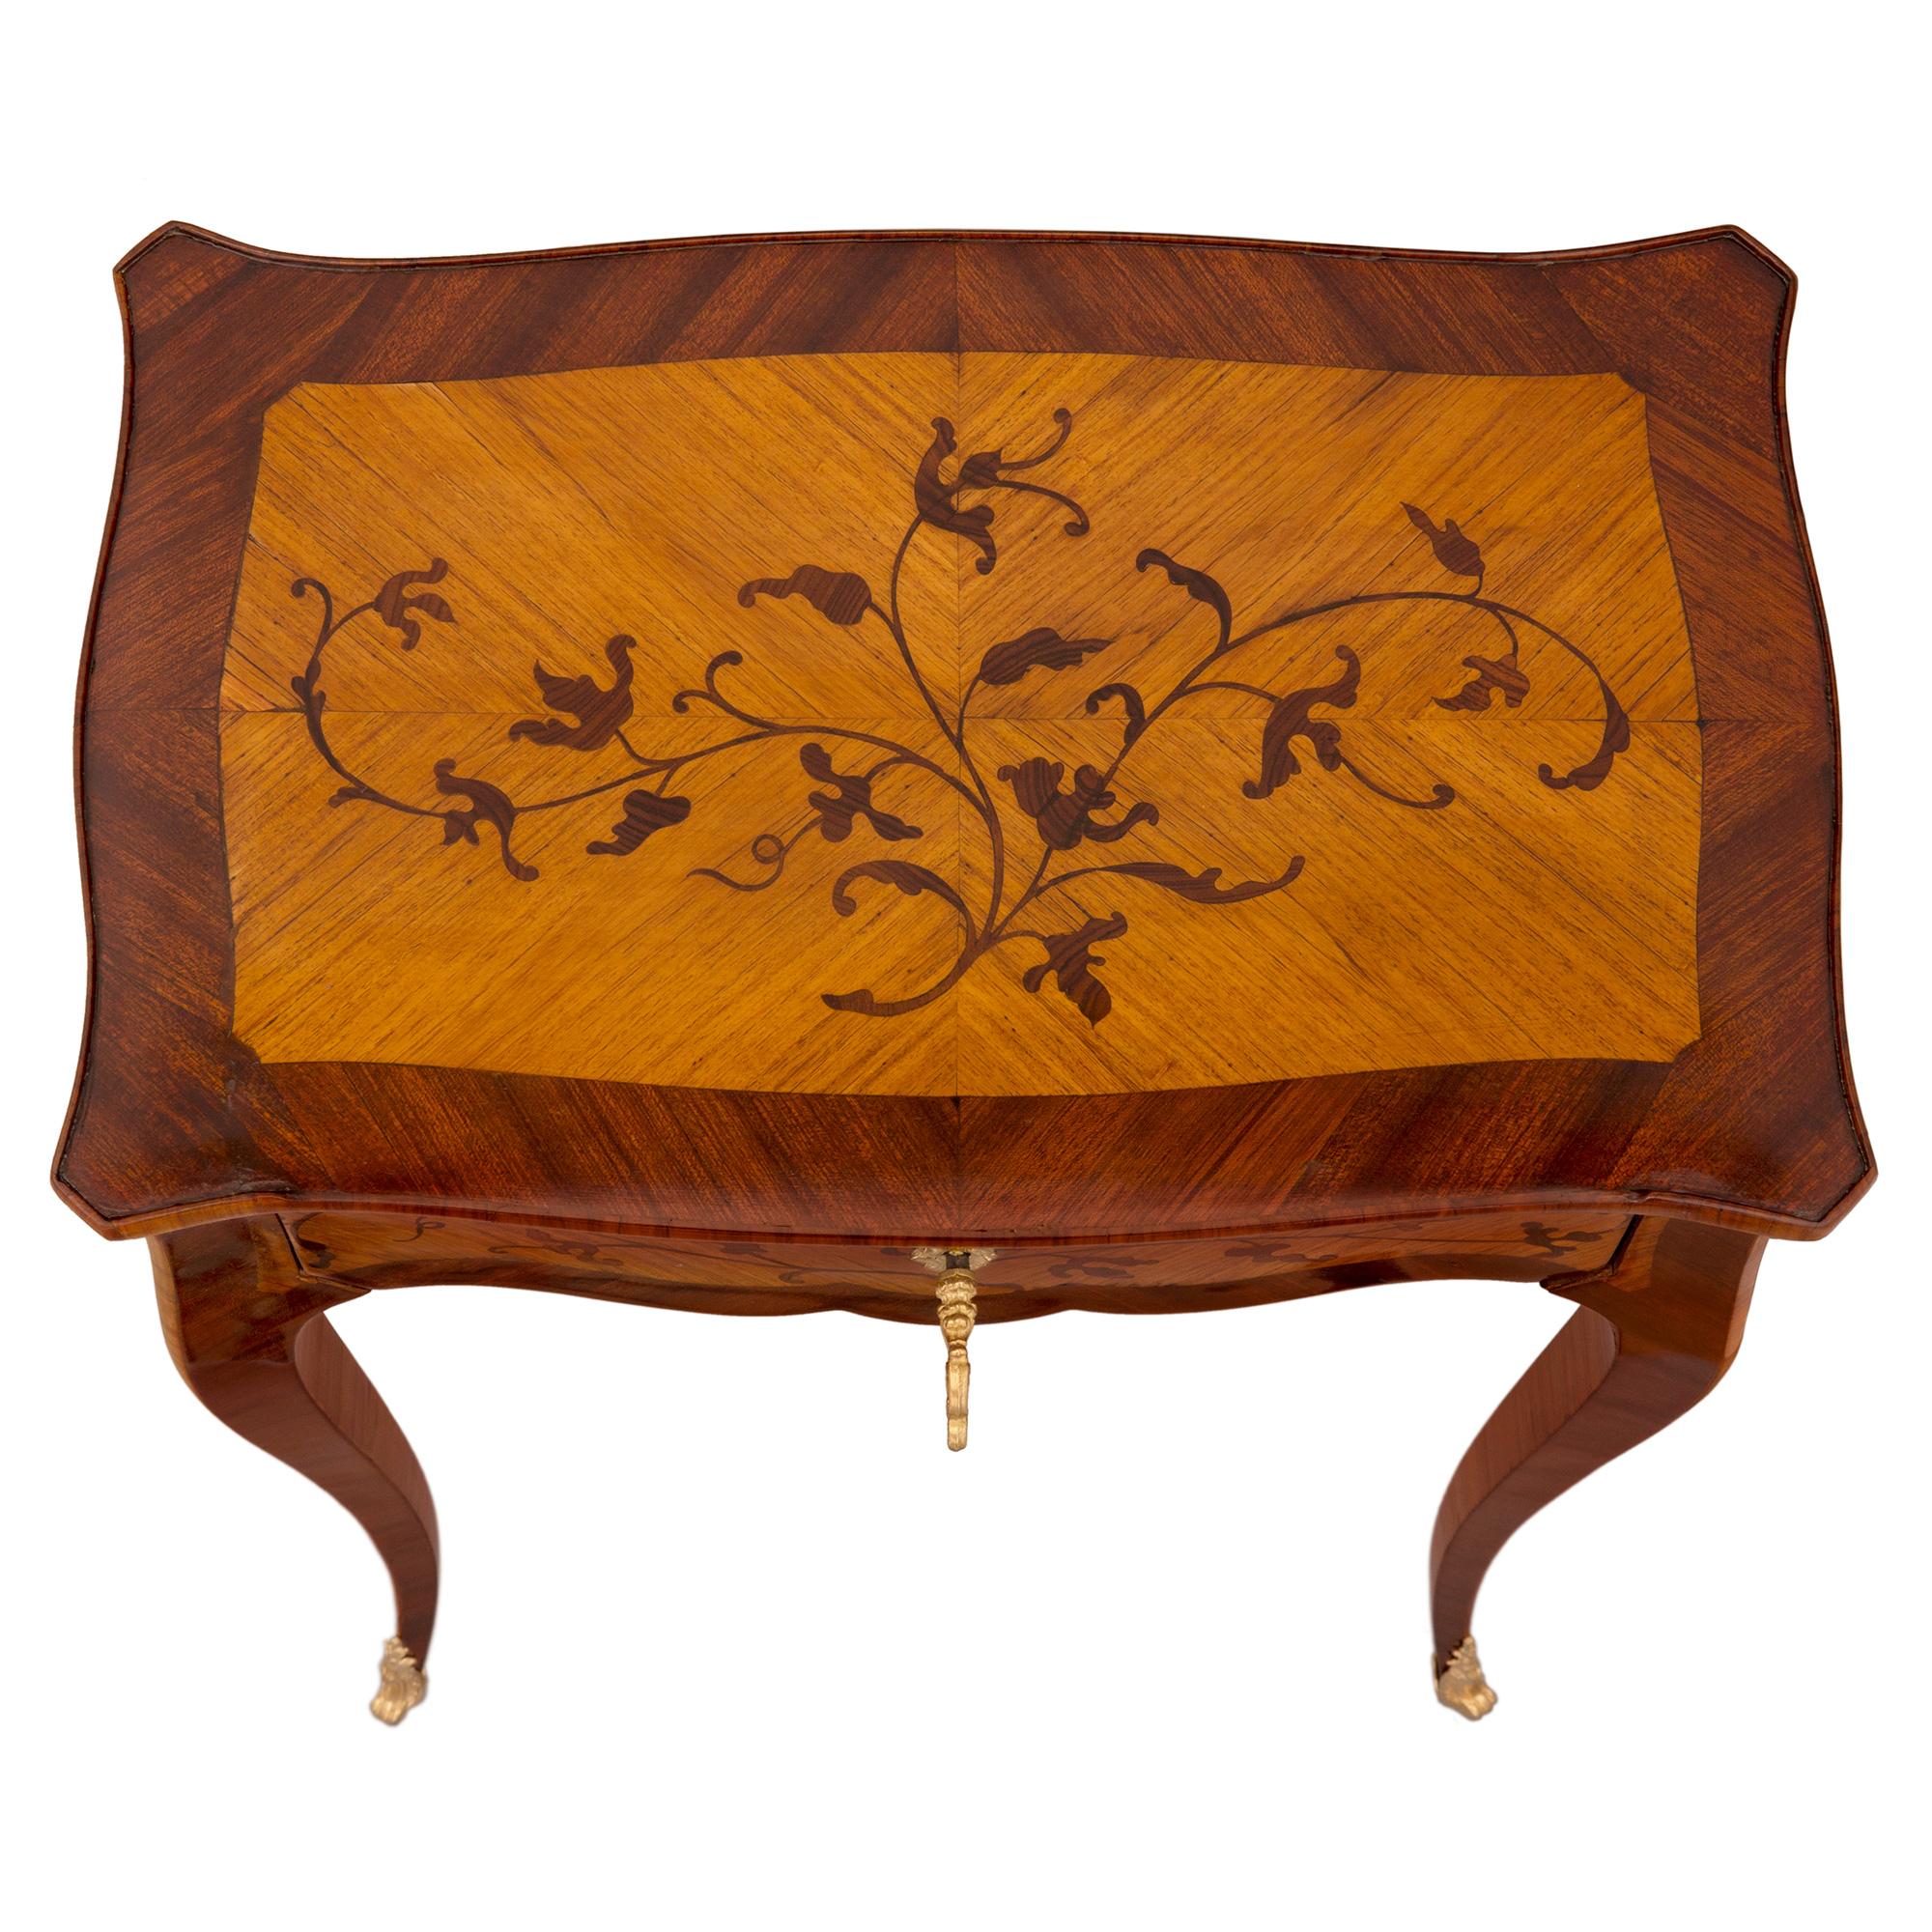 A charming French 19th century Louis XV st. kingwood, tulipwood and ormolu side table. The table is raised by elegant slender tapered cabriole legs with fine fitted ormolu sabots. The scalloped shaped frieze displays one drawer with beautiful